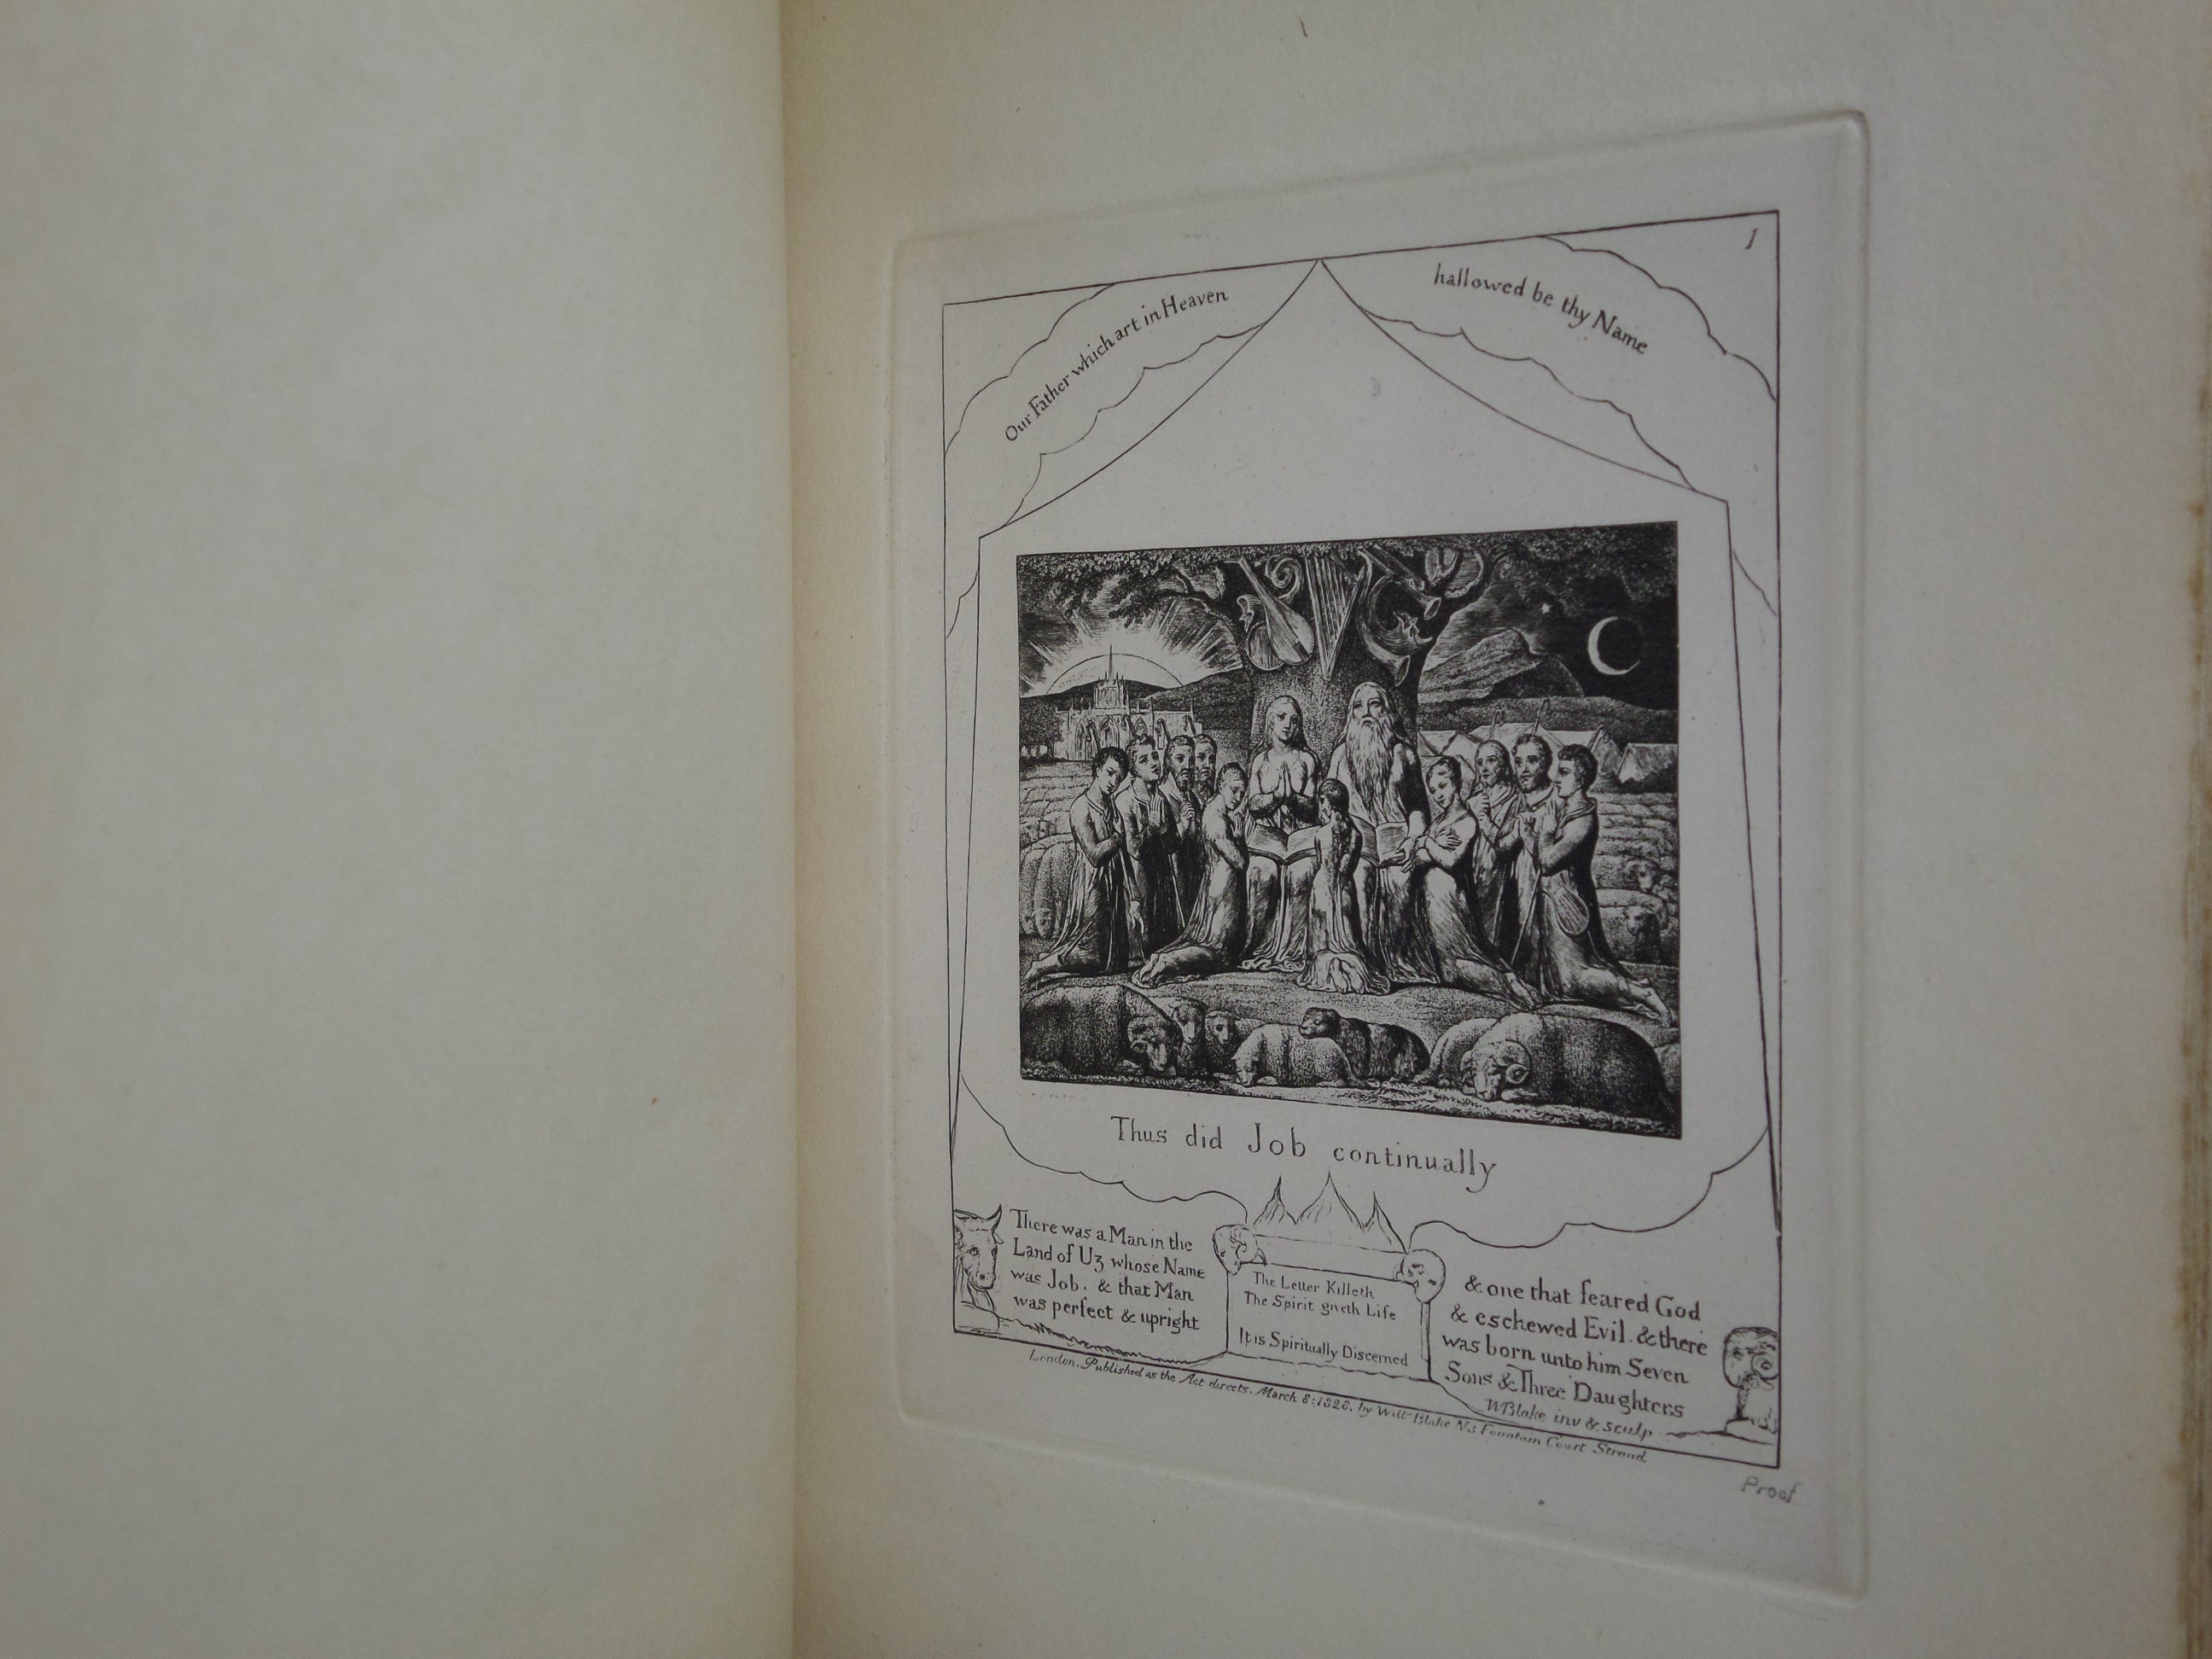 ILLUSTRATIONS OF THE BOOK OF JOB INVENTED & ENGRAVED BY WILLIAM BLAKE 1903